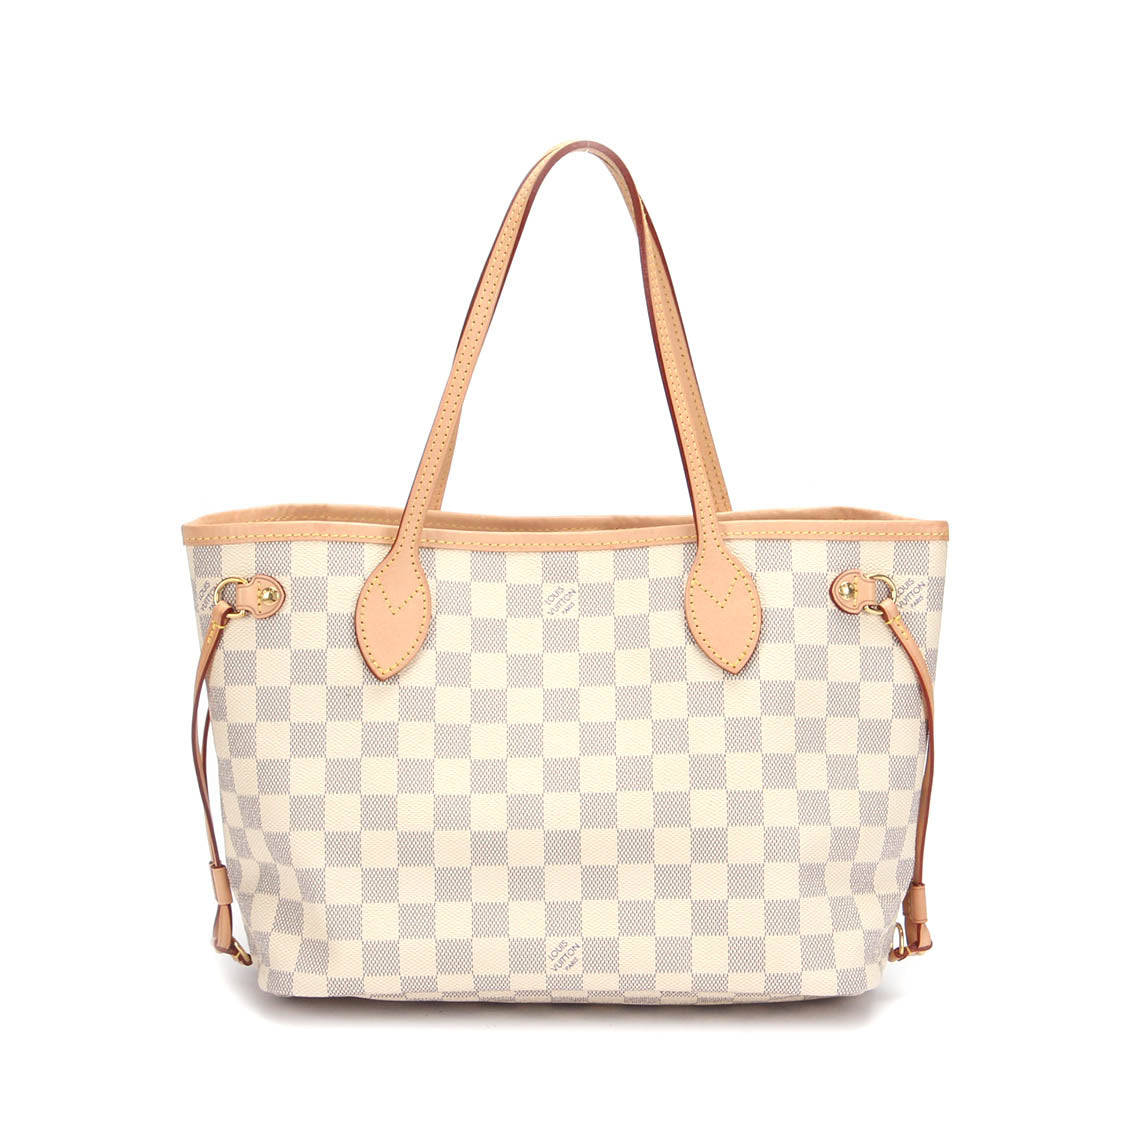 Damier Azur Neverfull PM with Pouch N41362